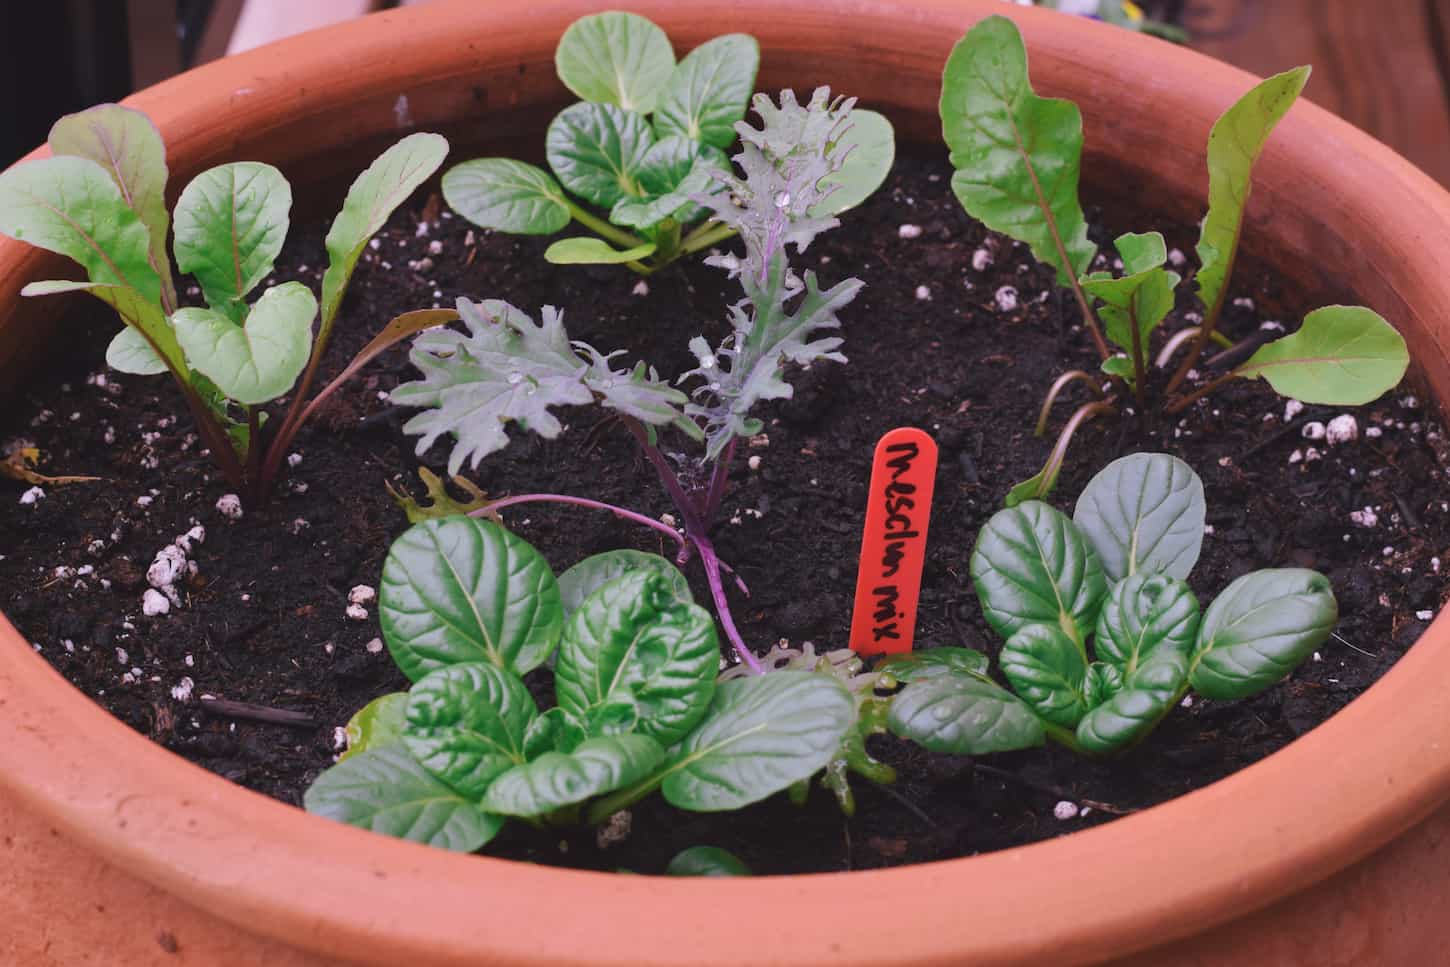 An image of different types of lettuce seedlings growing in a pot.